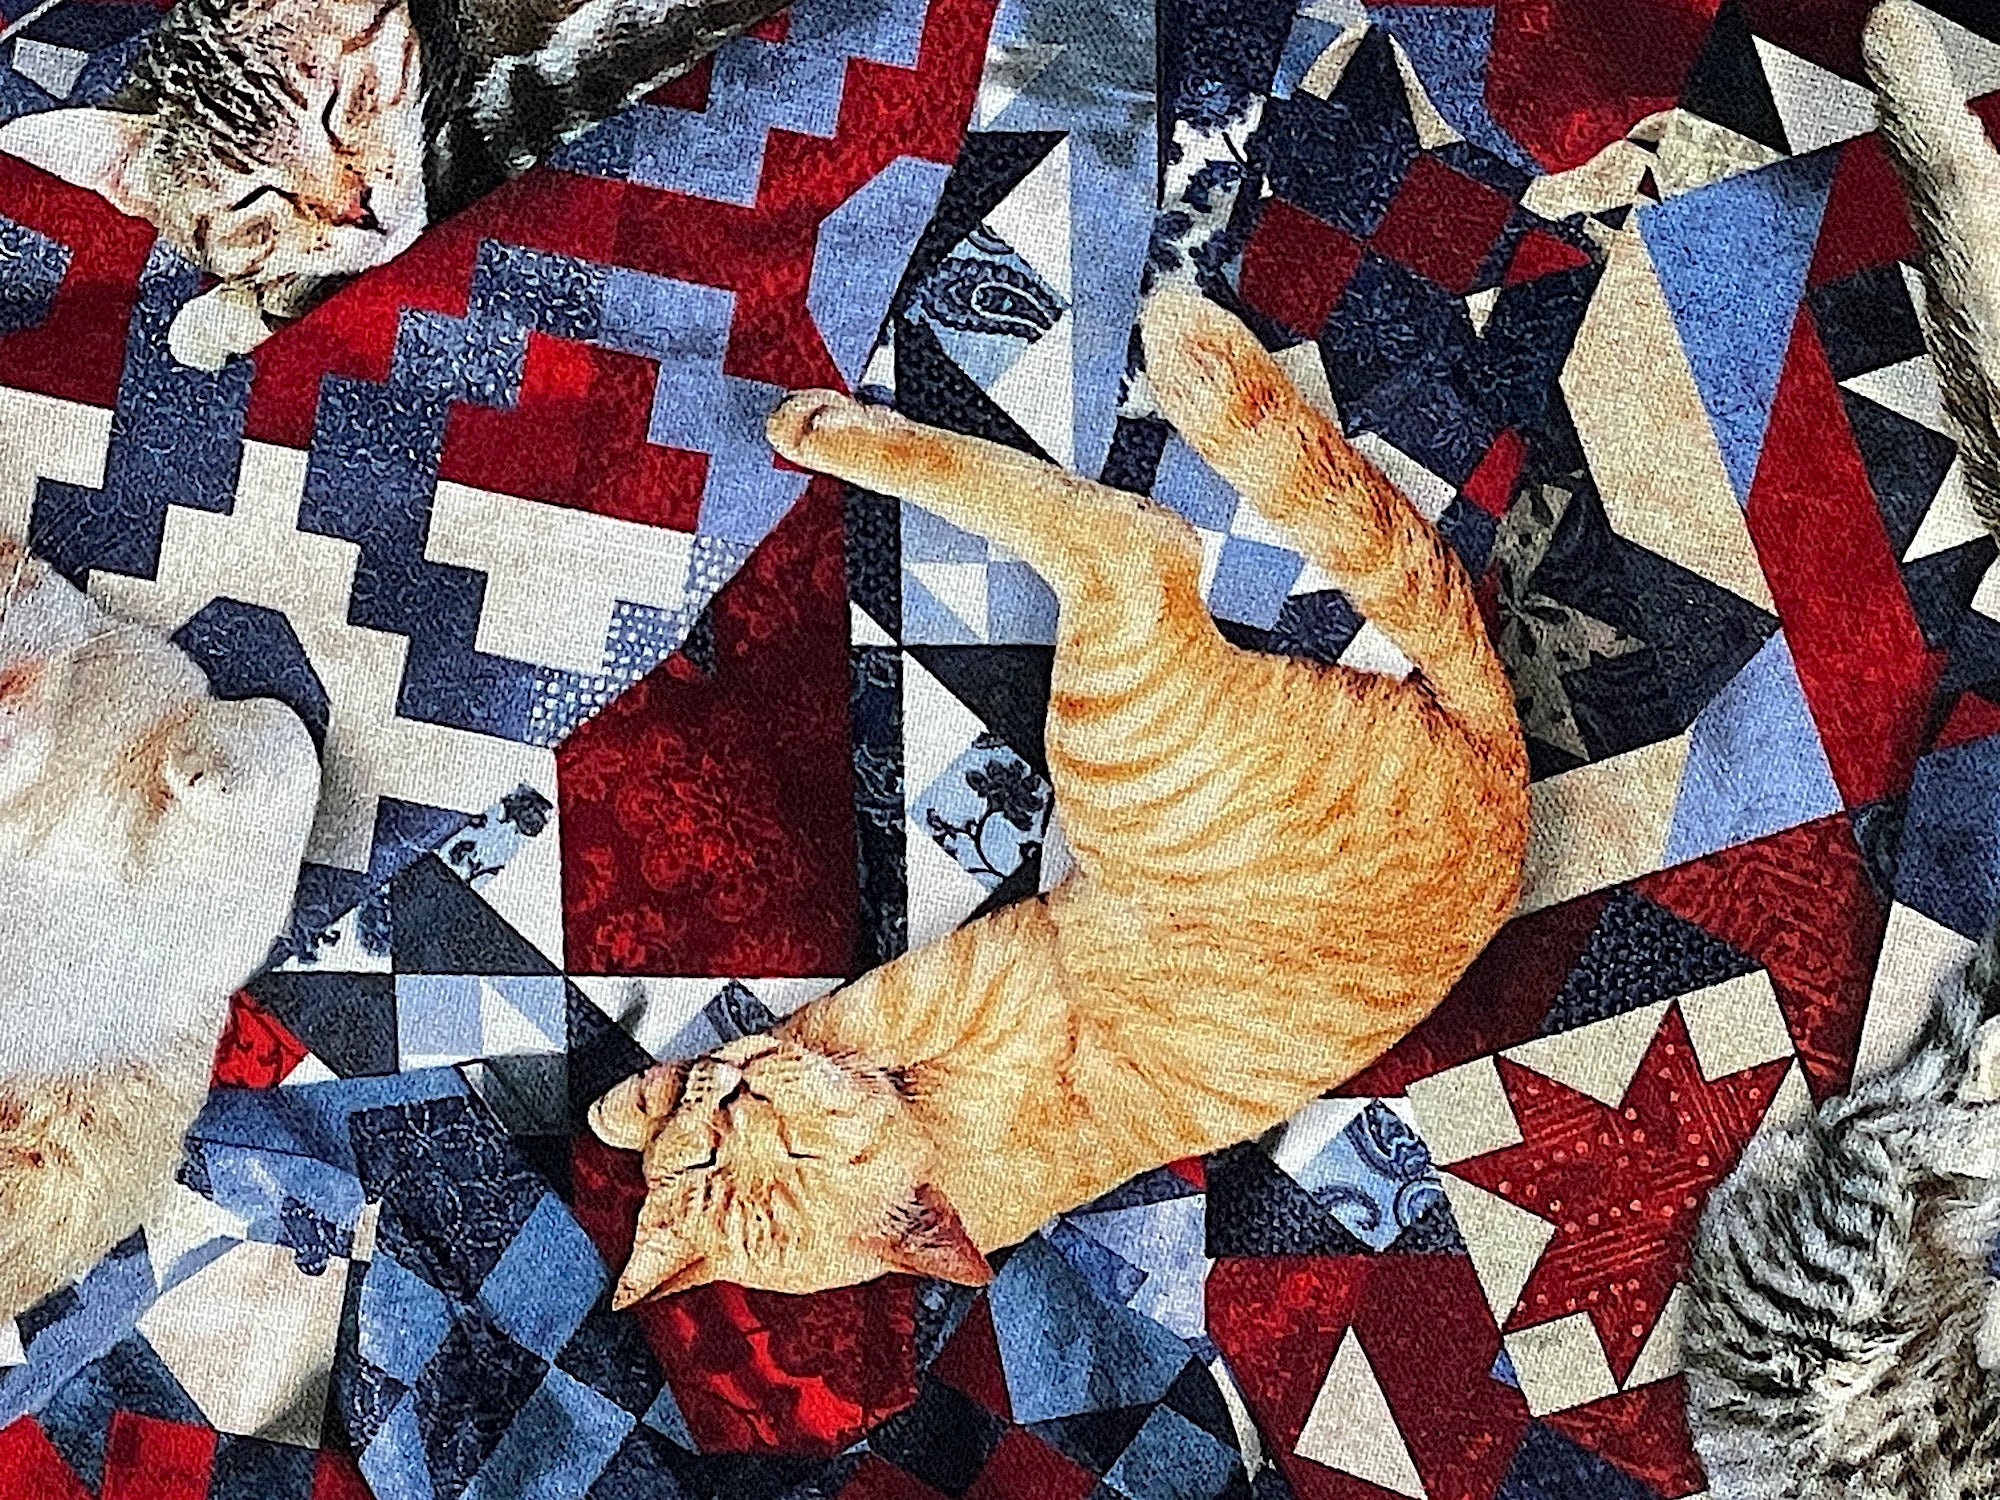 Close up of a cat sleeping on a quilt.